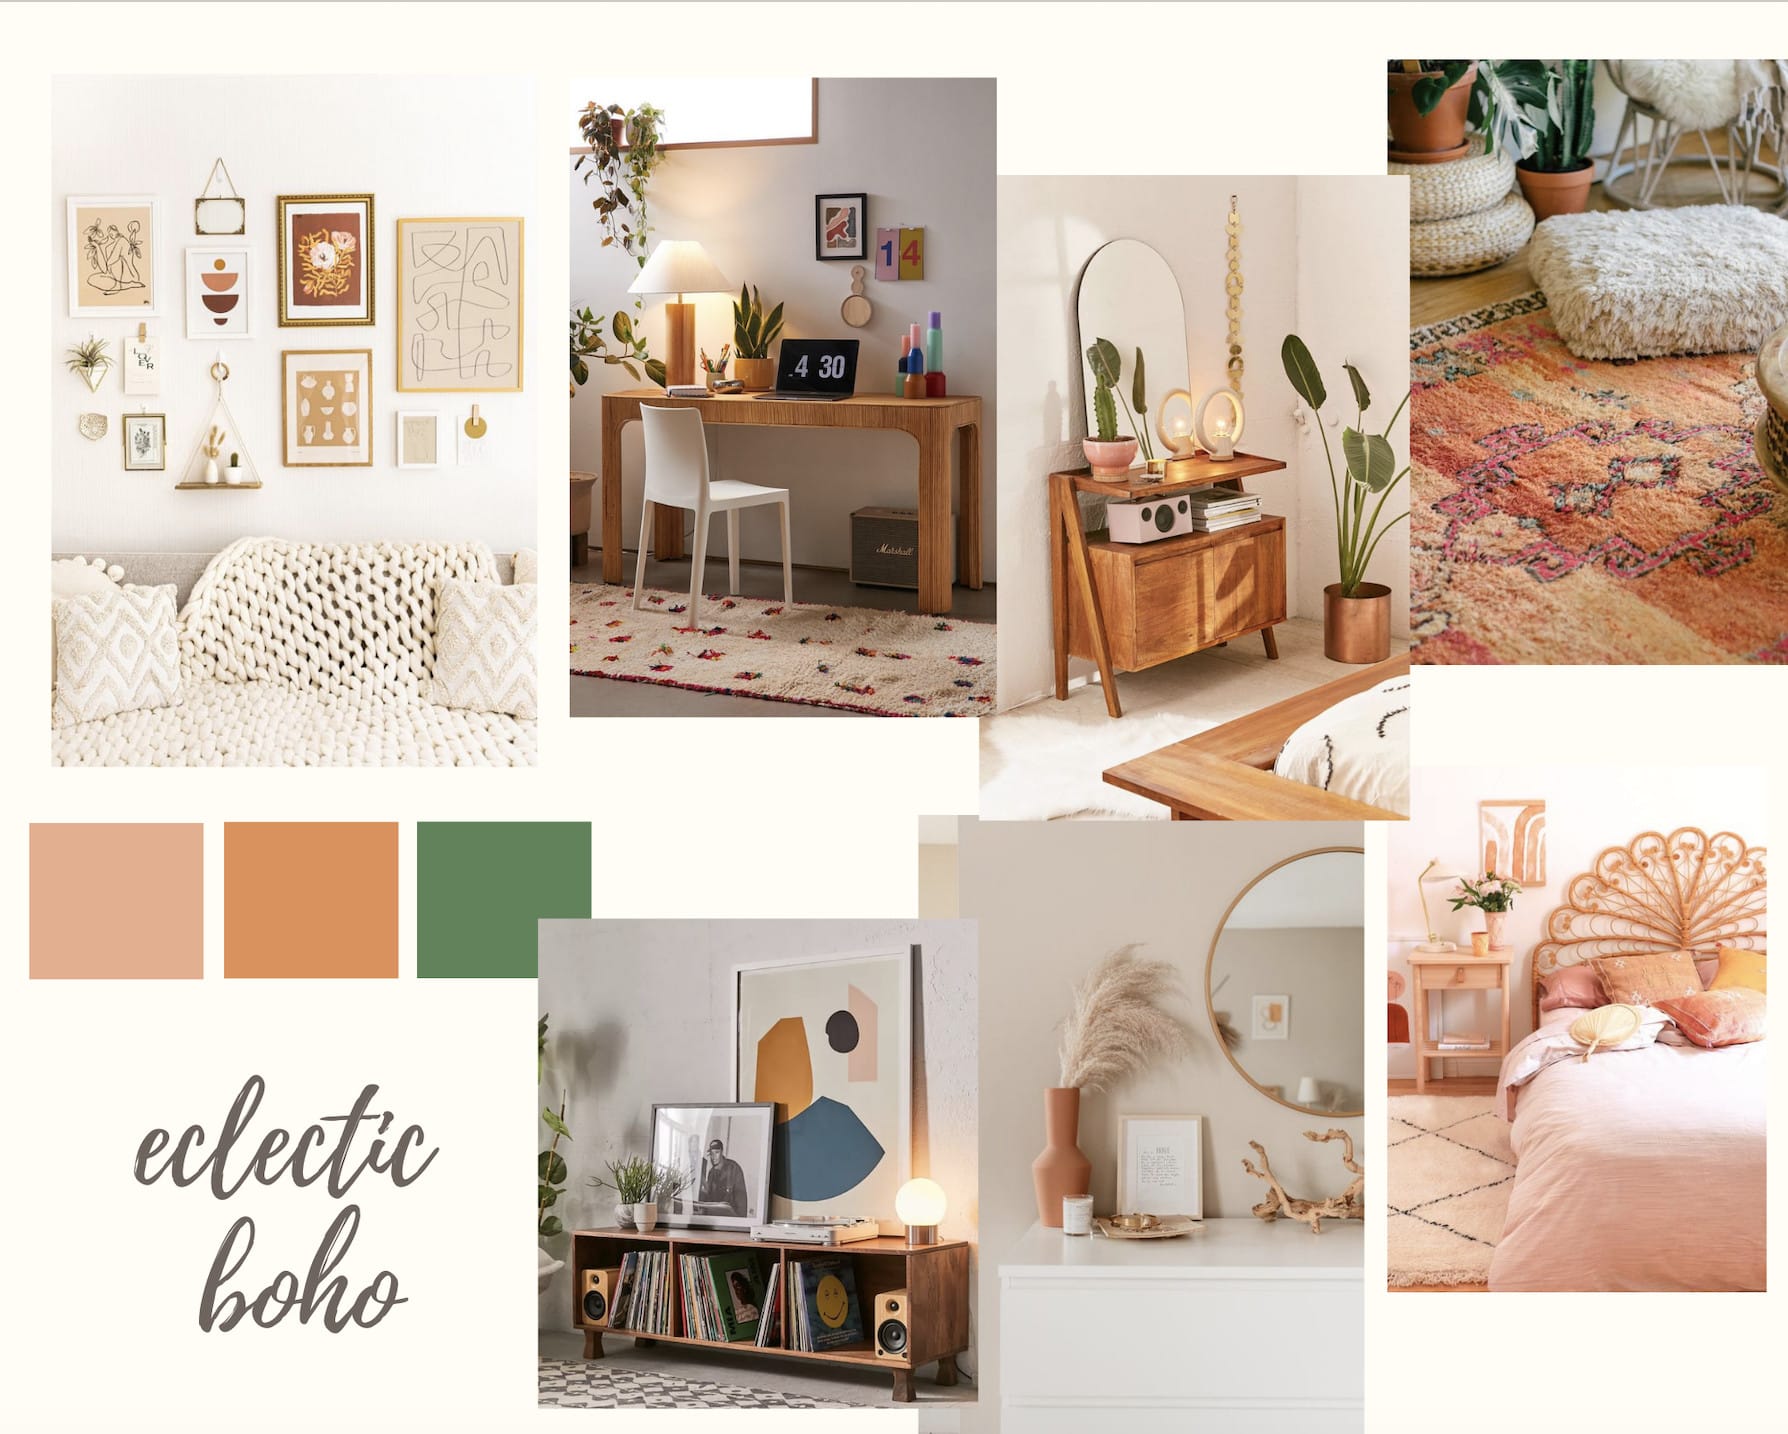 Create an interior design mood board and color scheme by